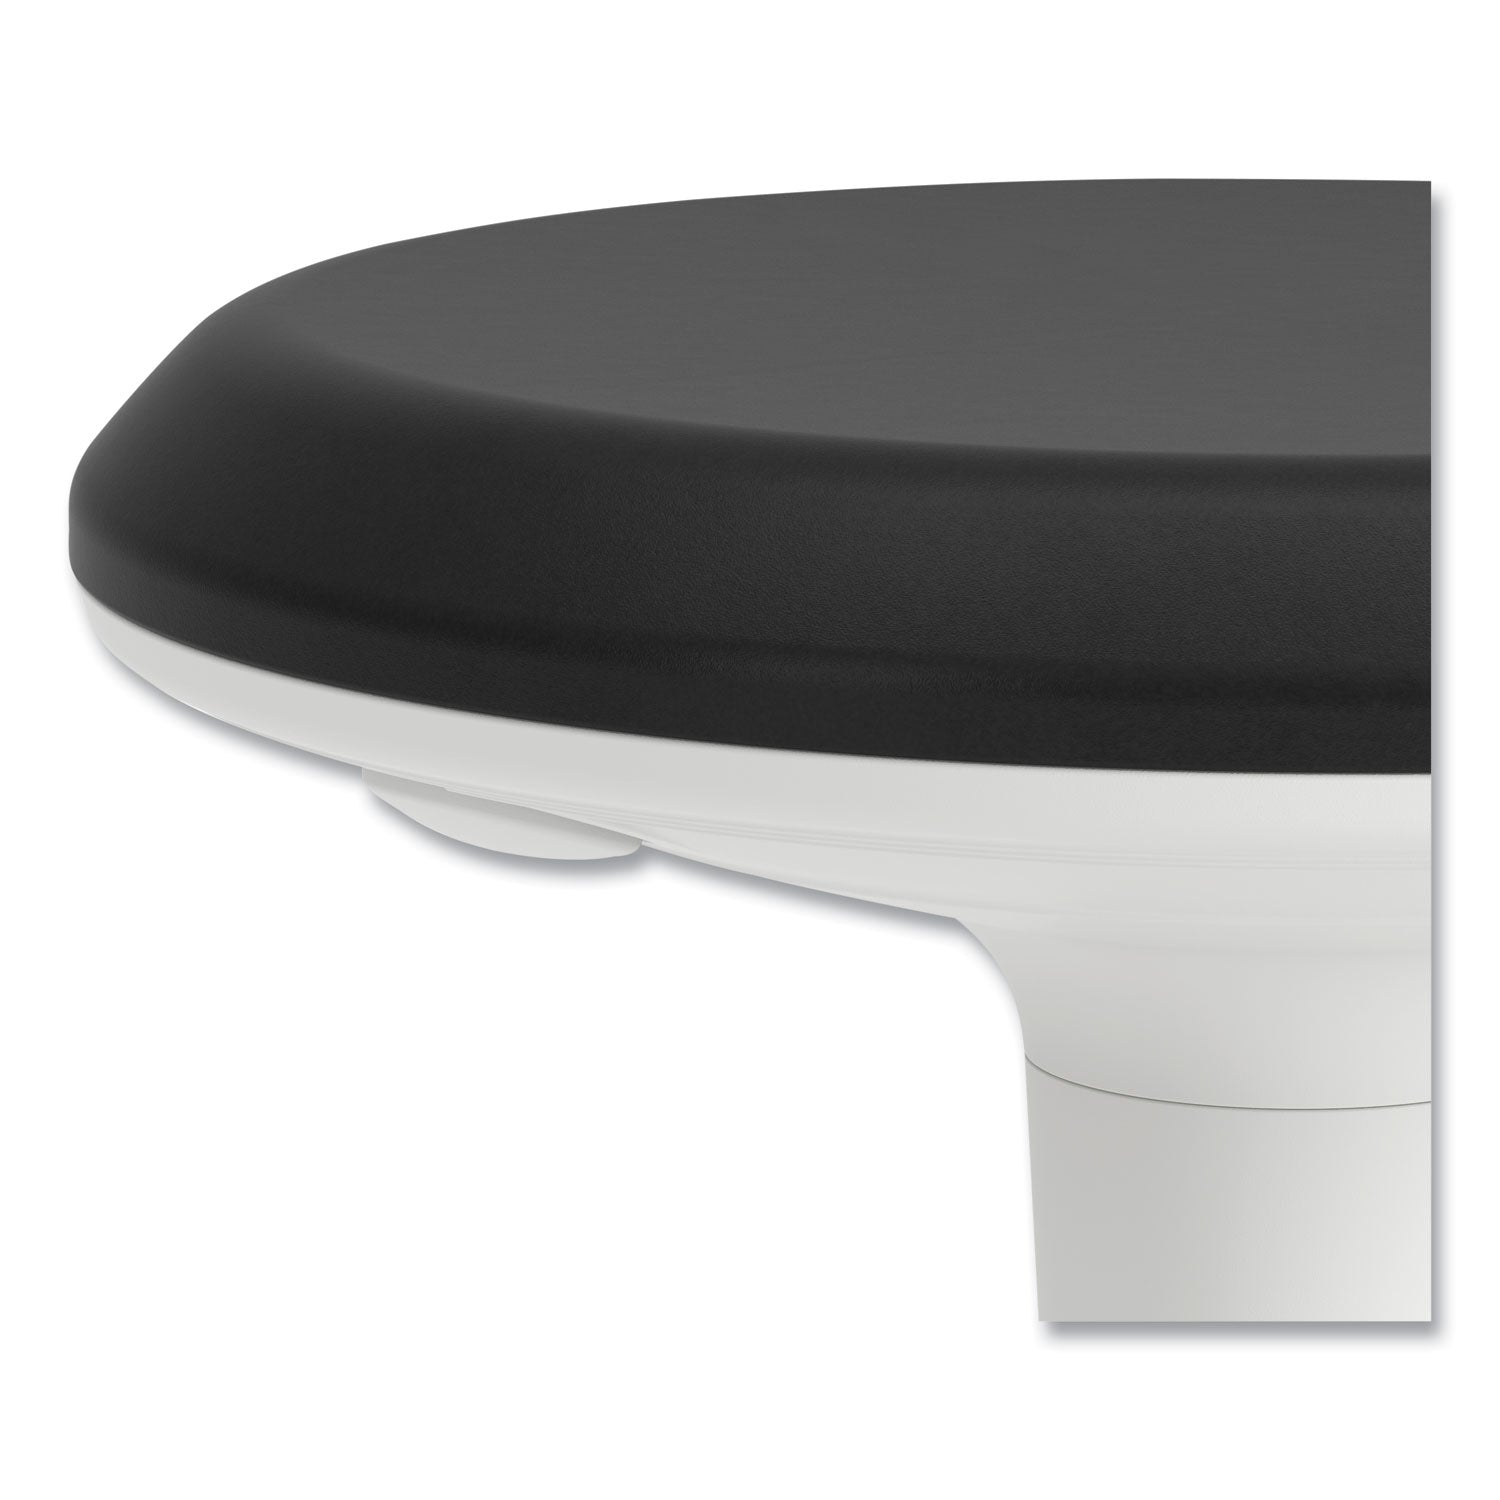 revel-adjustable-ht-fidget-stool-backlessup-to-250lb-1375-to-185-seat-htblack-seat-white-base-ships-in-7-10-bus-days_honhefs01bl - 3